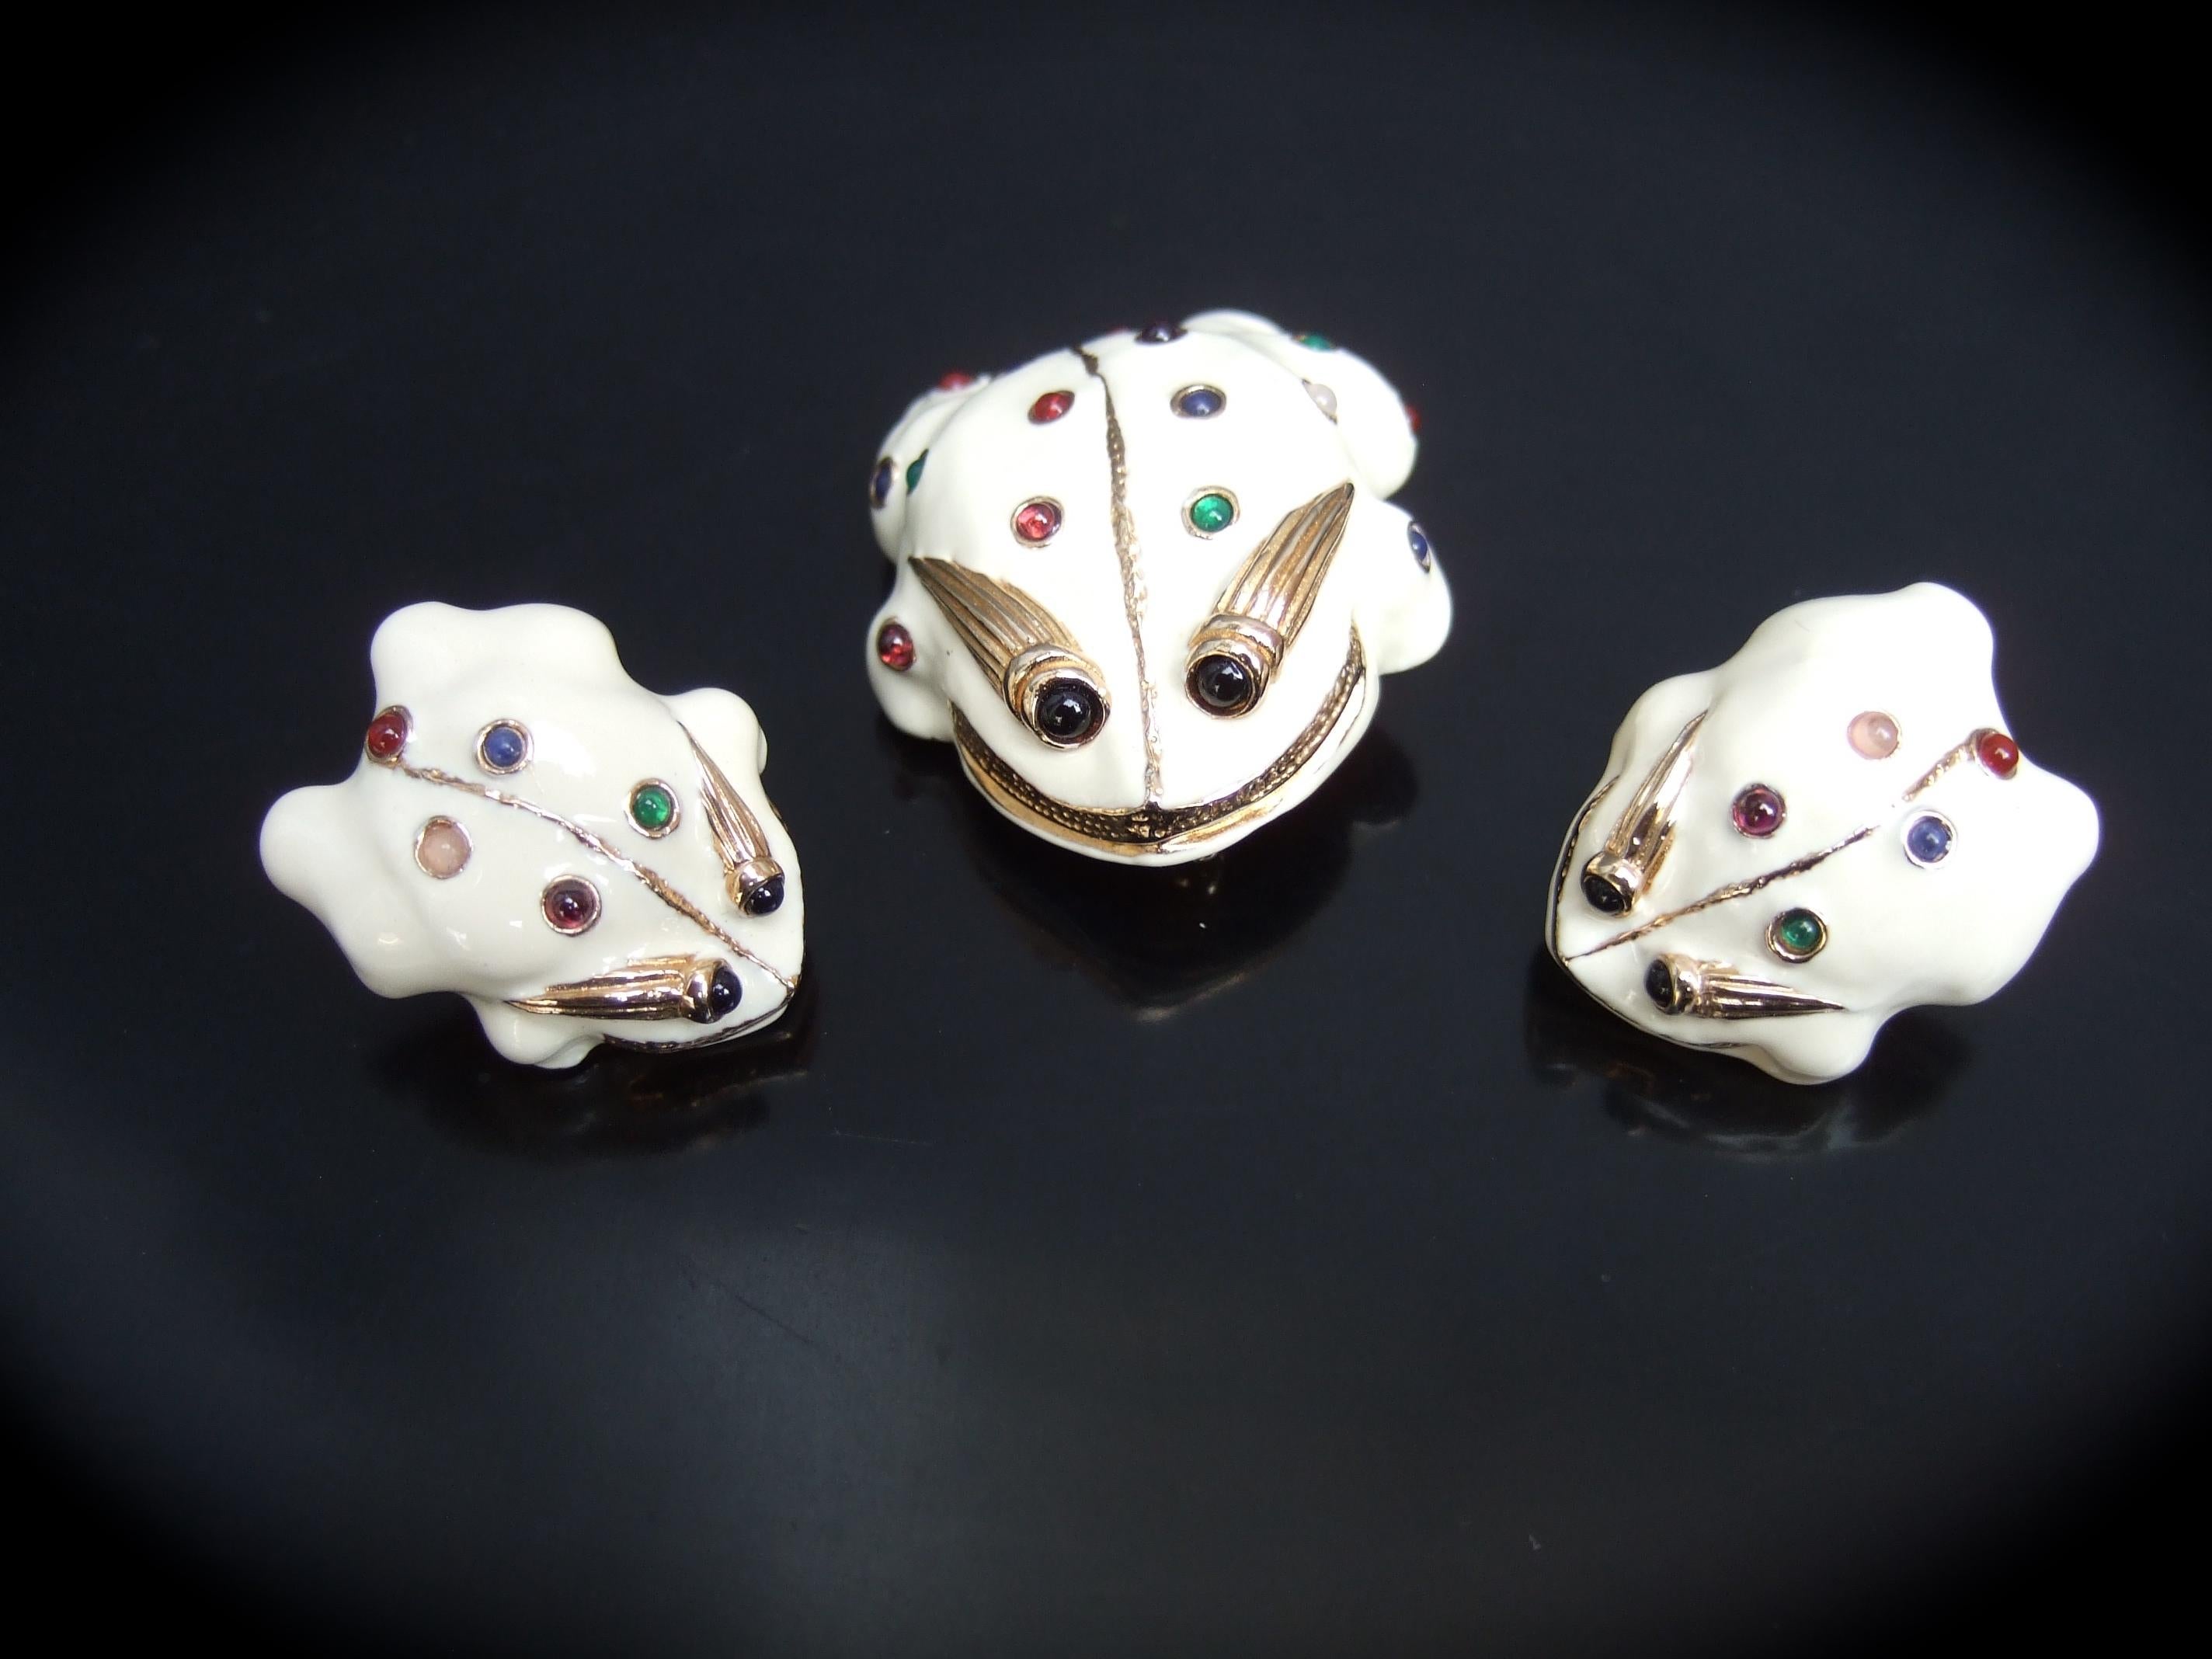 Judith Leiber Charming glass cabochon white enamel frog brooch & earrings set c 1980s
The set is designed with a trio of endearing creamy white enamel frogs; embellished 
with small glass cabochons in a myriad of jewel tone colors 

The trio of